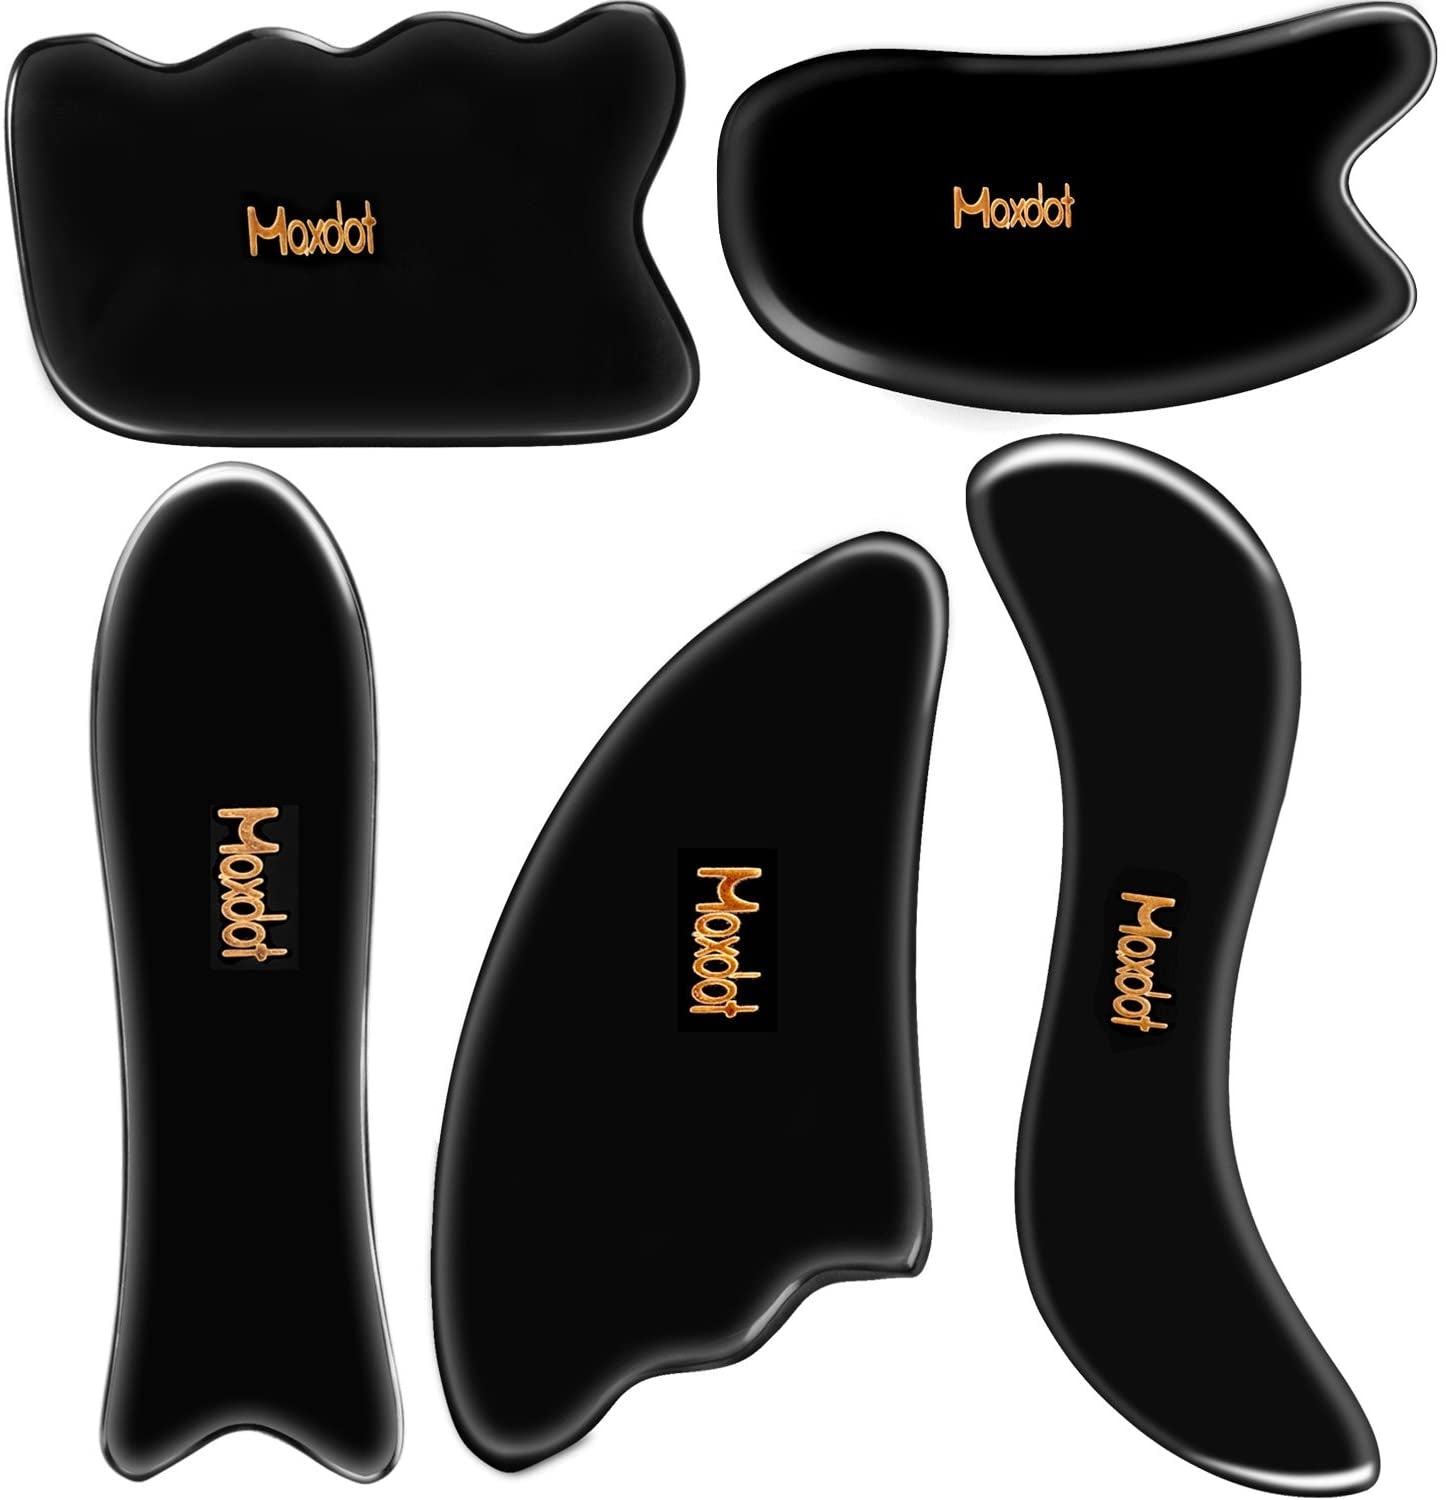 Gua Sha Massage Tools Set - 5 Piece for Face Back and Neck Pain Relief